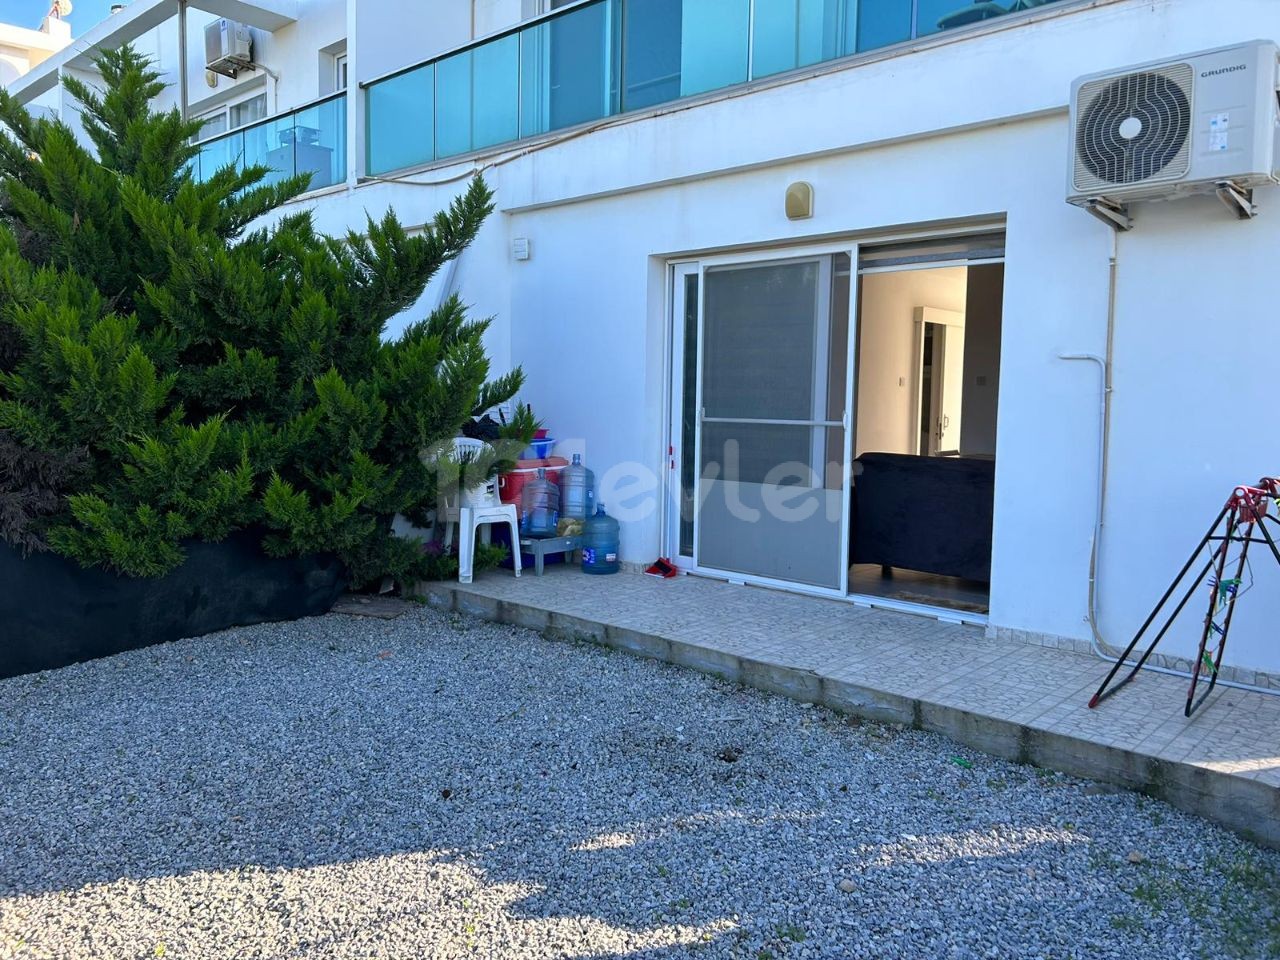 Opportunity apartment for sale with garden next to Girne American University